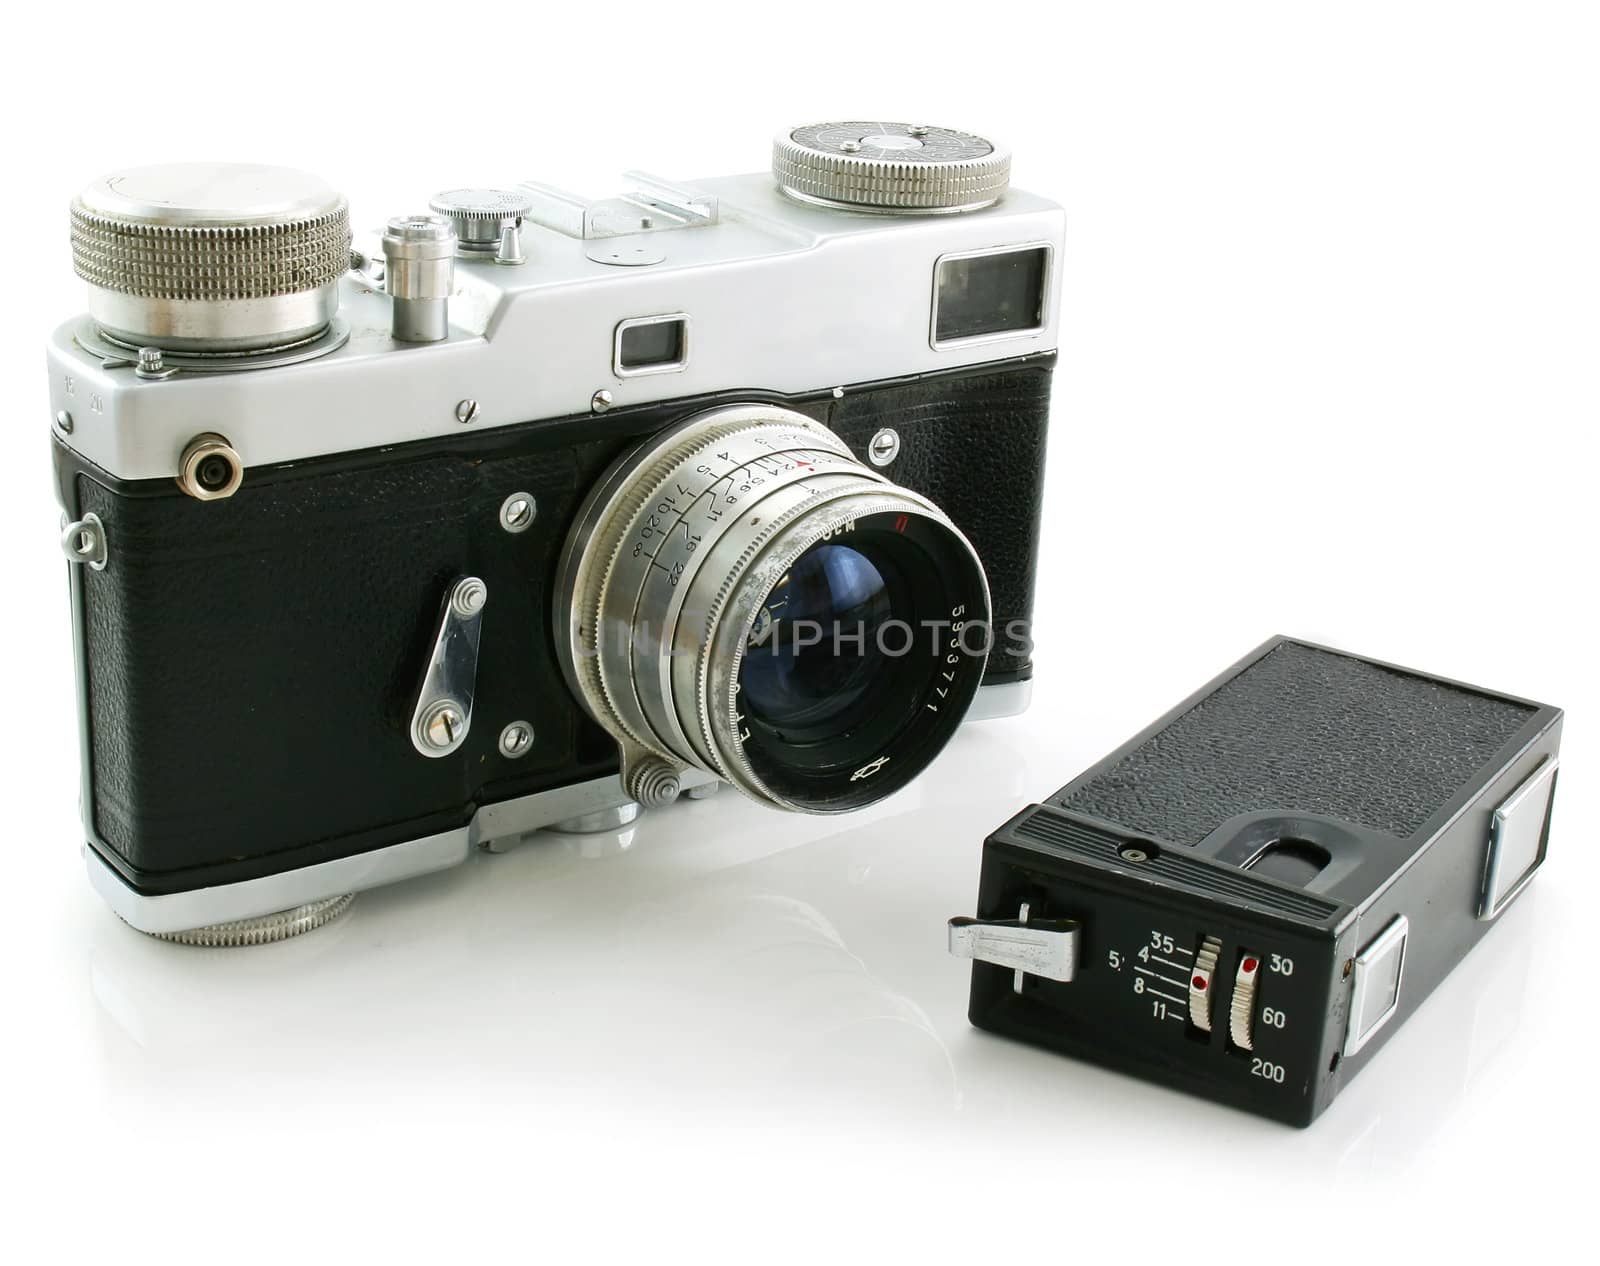 Small espionage photo camera and film camera isolated on a white background